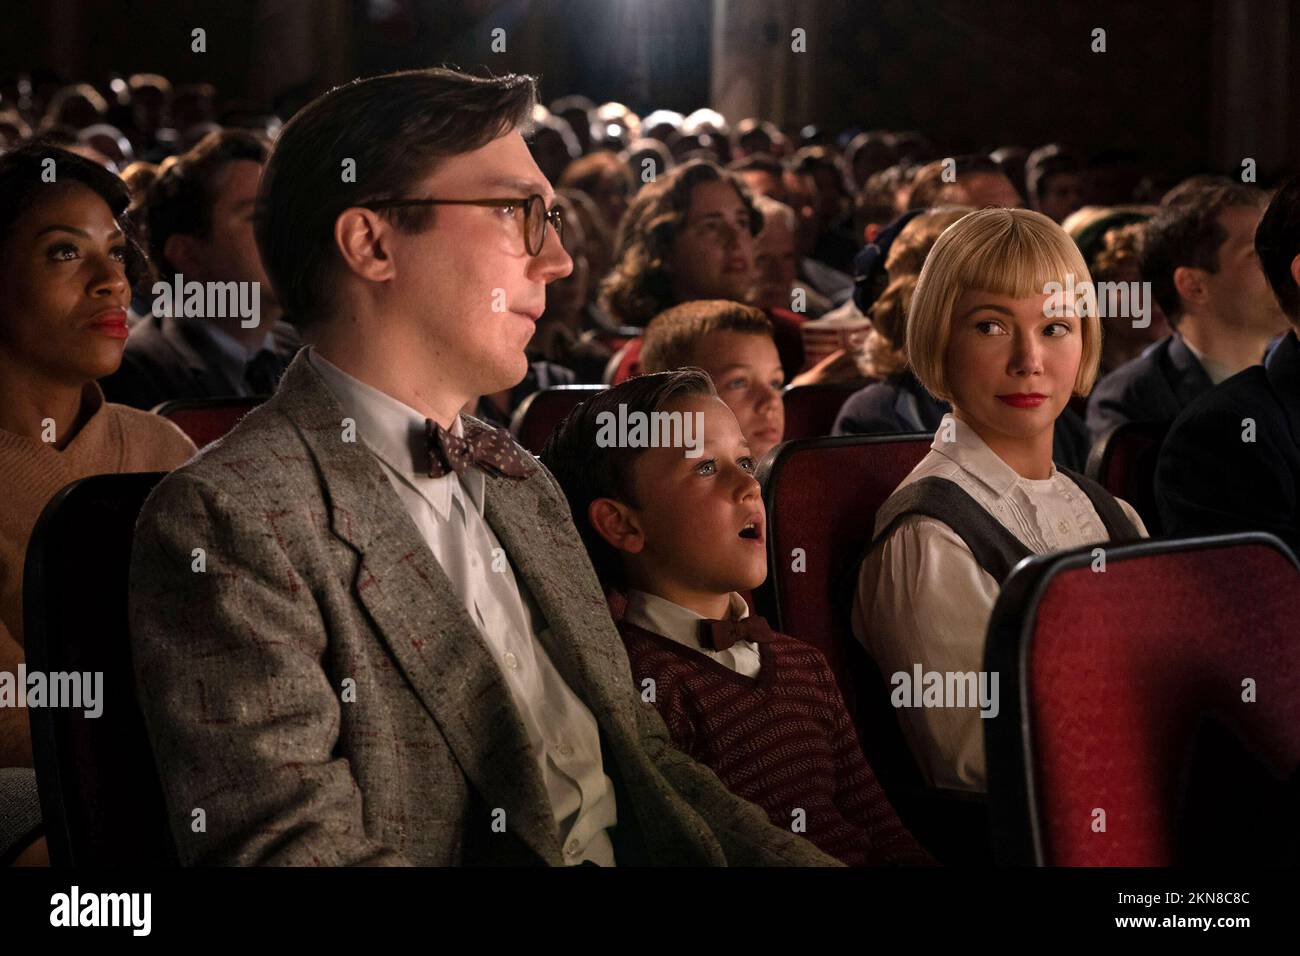 MICHELLE WILLIAMS, PAUL DANO and MAETO ZORYON FRANCIS-DEFORD in THE FABELMANS (2022), directed by STEVEN SPIELBERG. Credit: Universal Pictures / Amblin Partners / Album Stock Photo